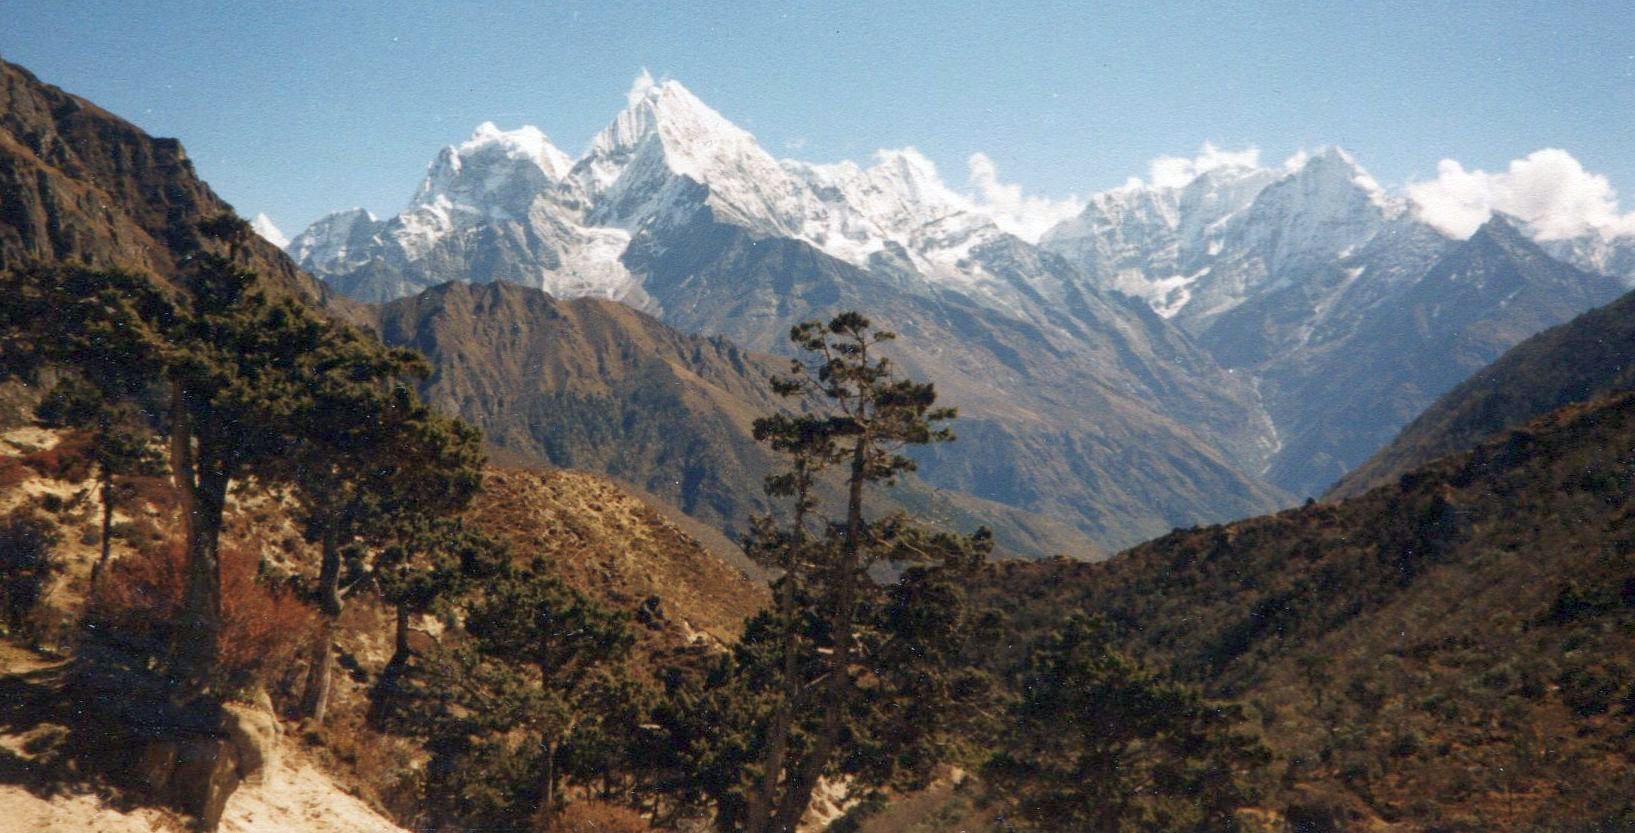 Mounts Kang Taiga and Thamserku on descent from Thame Village